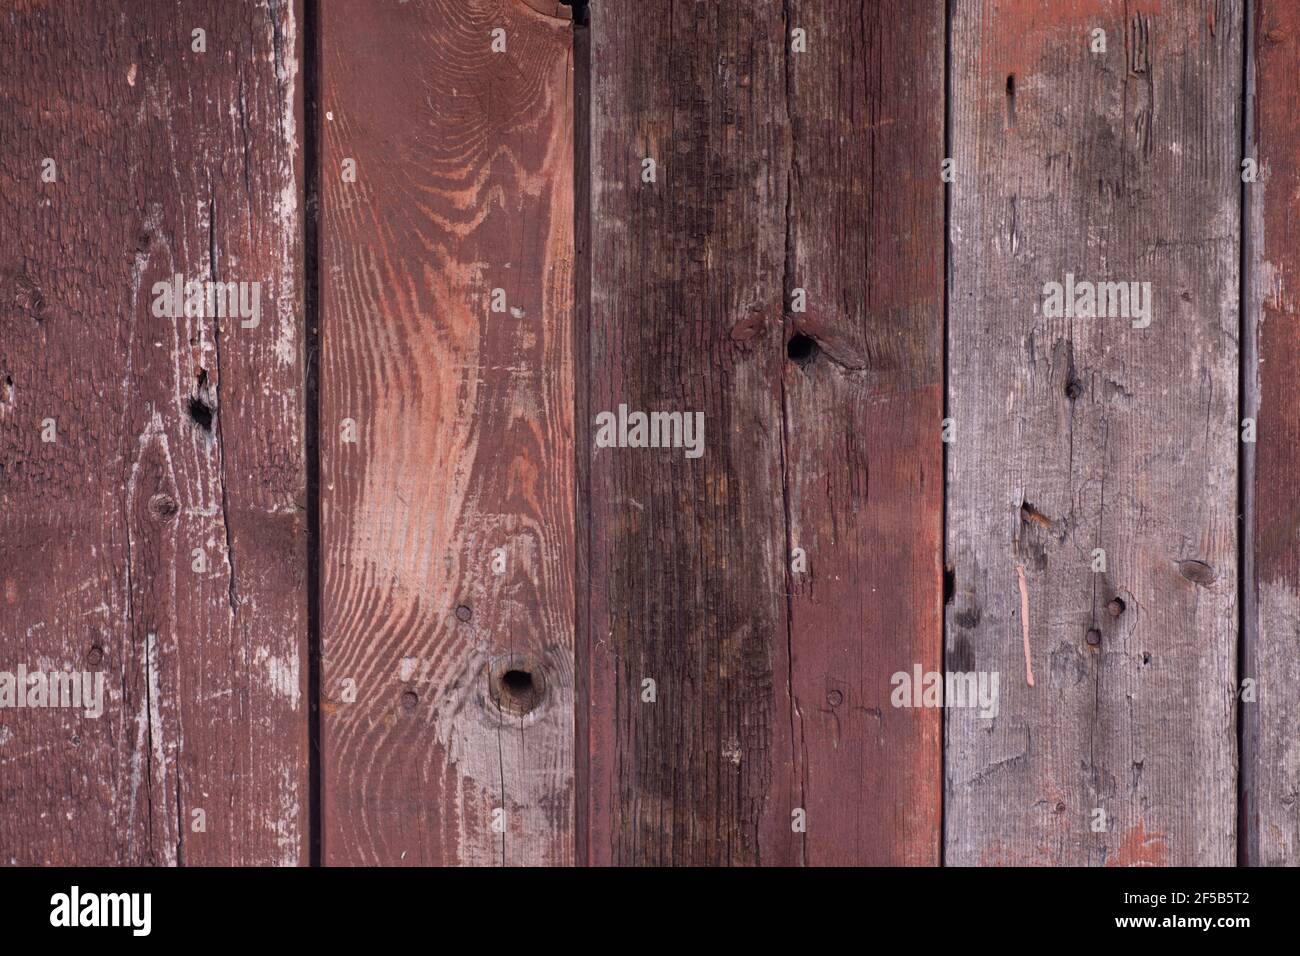 vintage wood texture. old wooden planks background.  Stock Photo